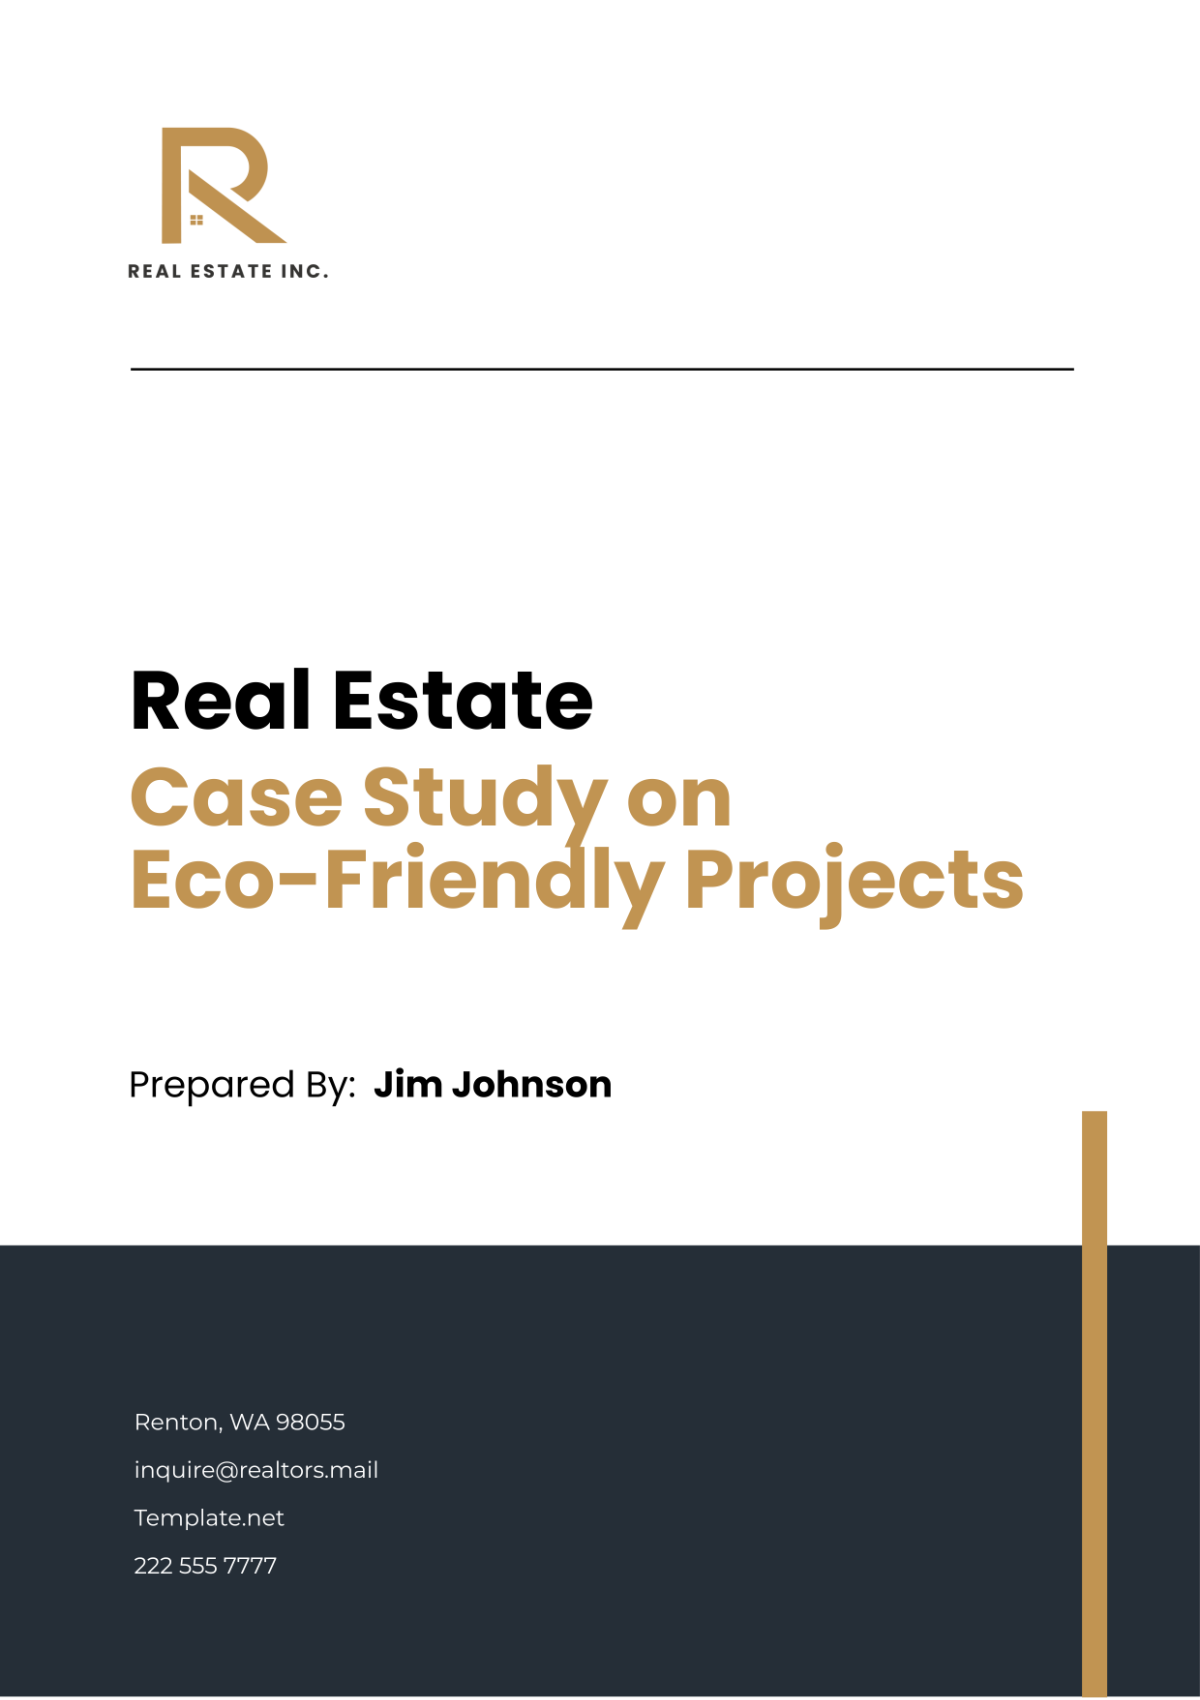 Real Estate Case Study on Eco-Friendly Projects Template